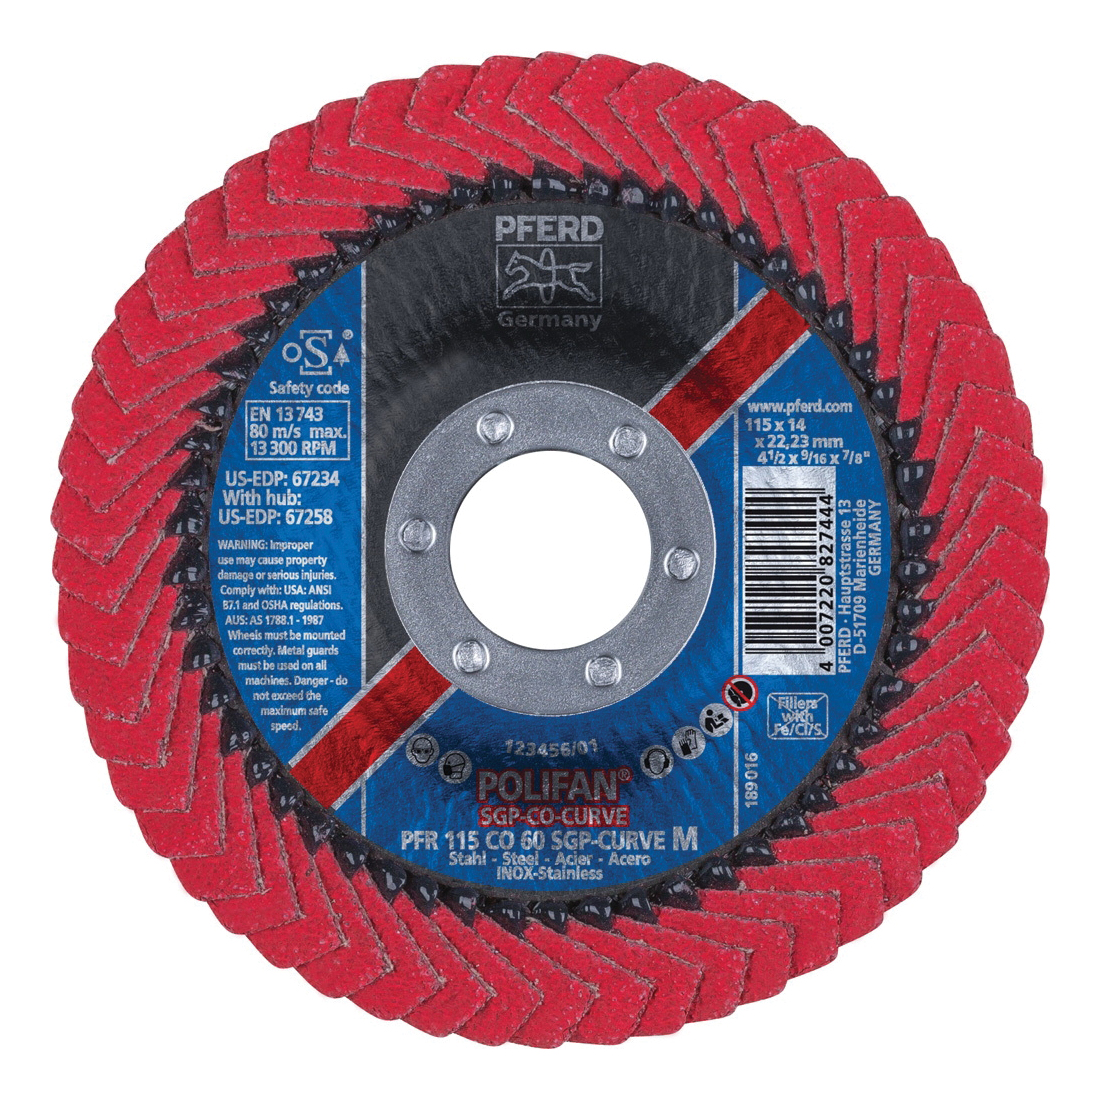 PFERD Polifan® 67234 Special Line SGP CO-CURVE Unthreaded Coated Abrasive Flap Disc, 4-1/2 in Dia, 7/8 in Center Hole, 60 Grit, Ceramic Oxide Abrasive, Type PFR/Radial Disc